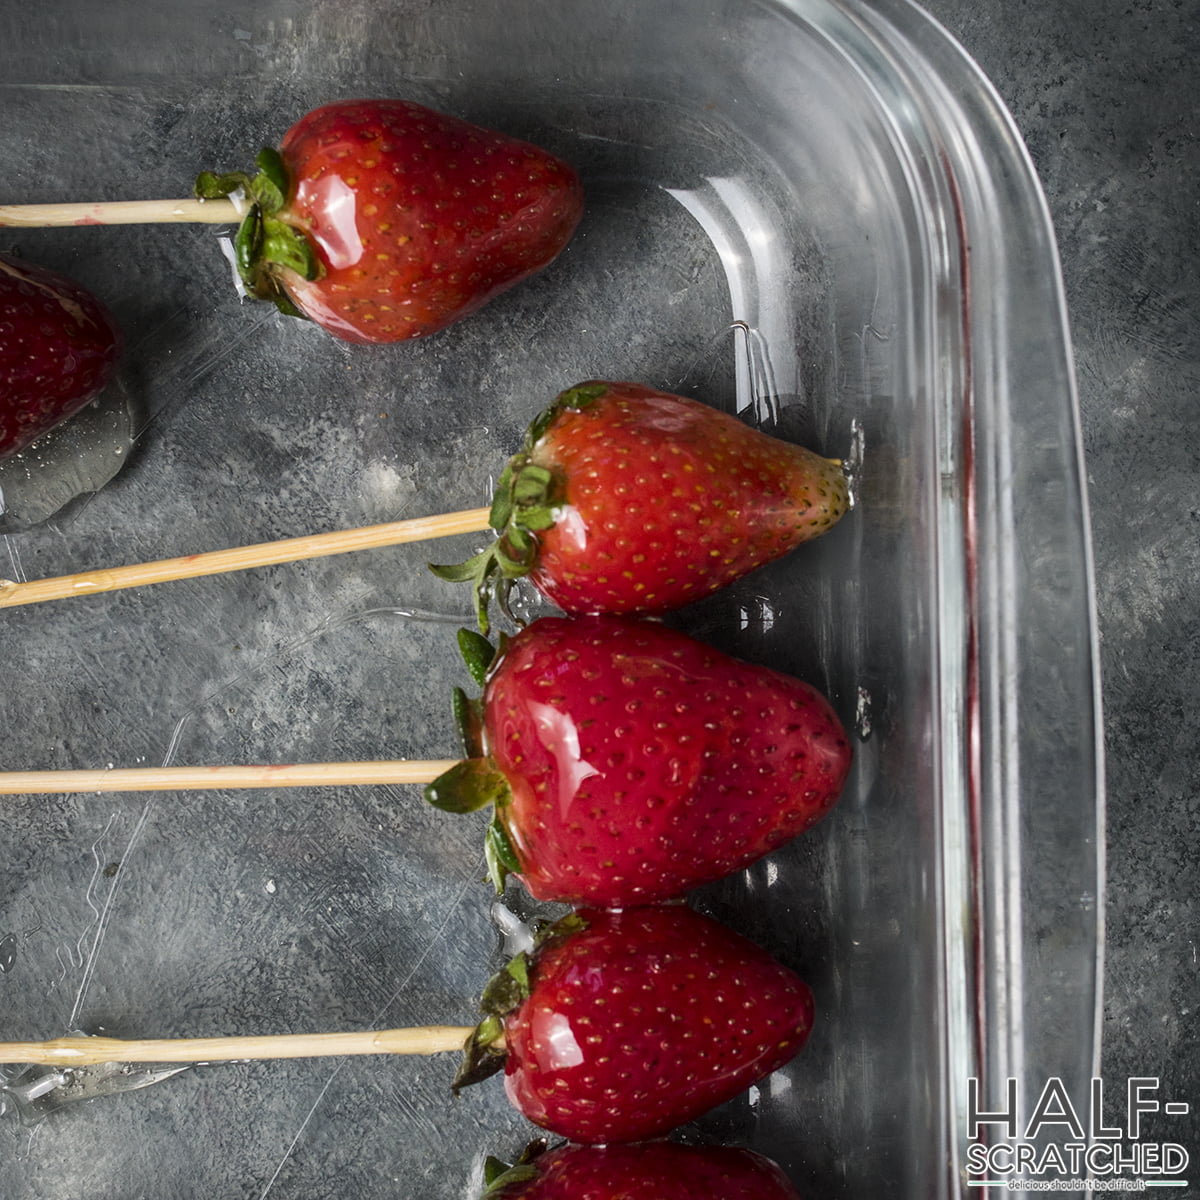 Strawberries with syrup in a baking dish